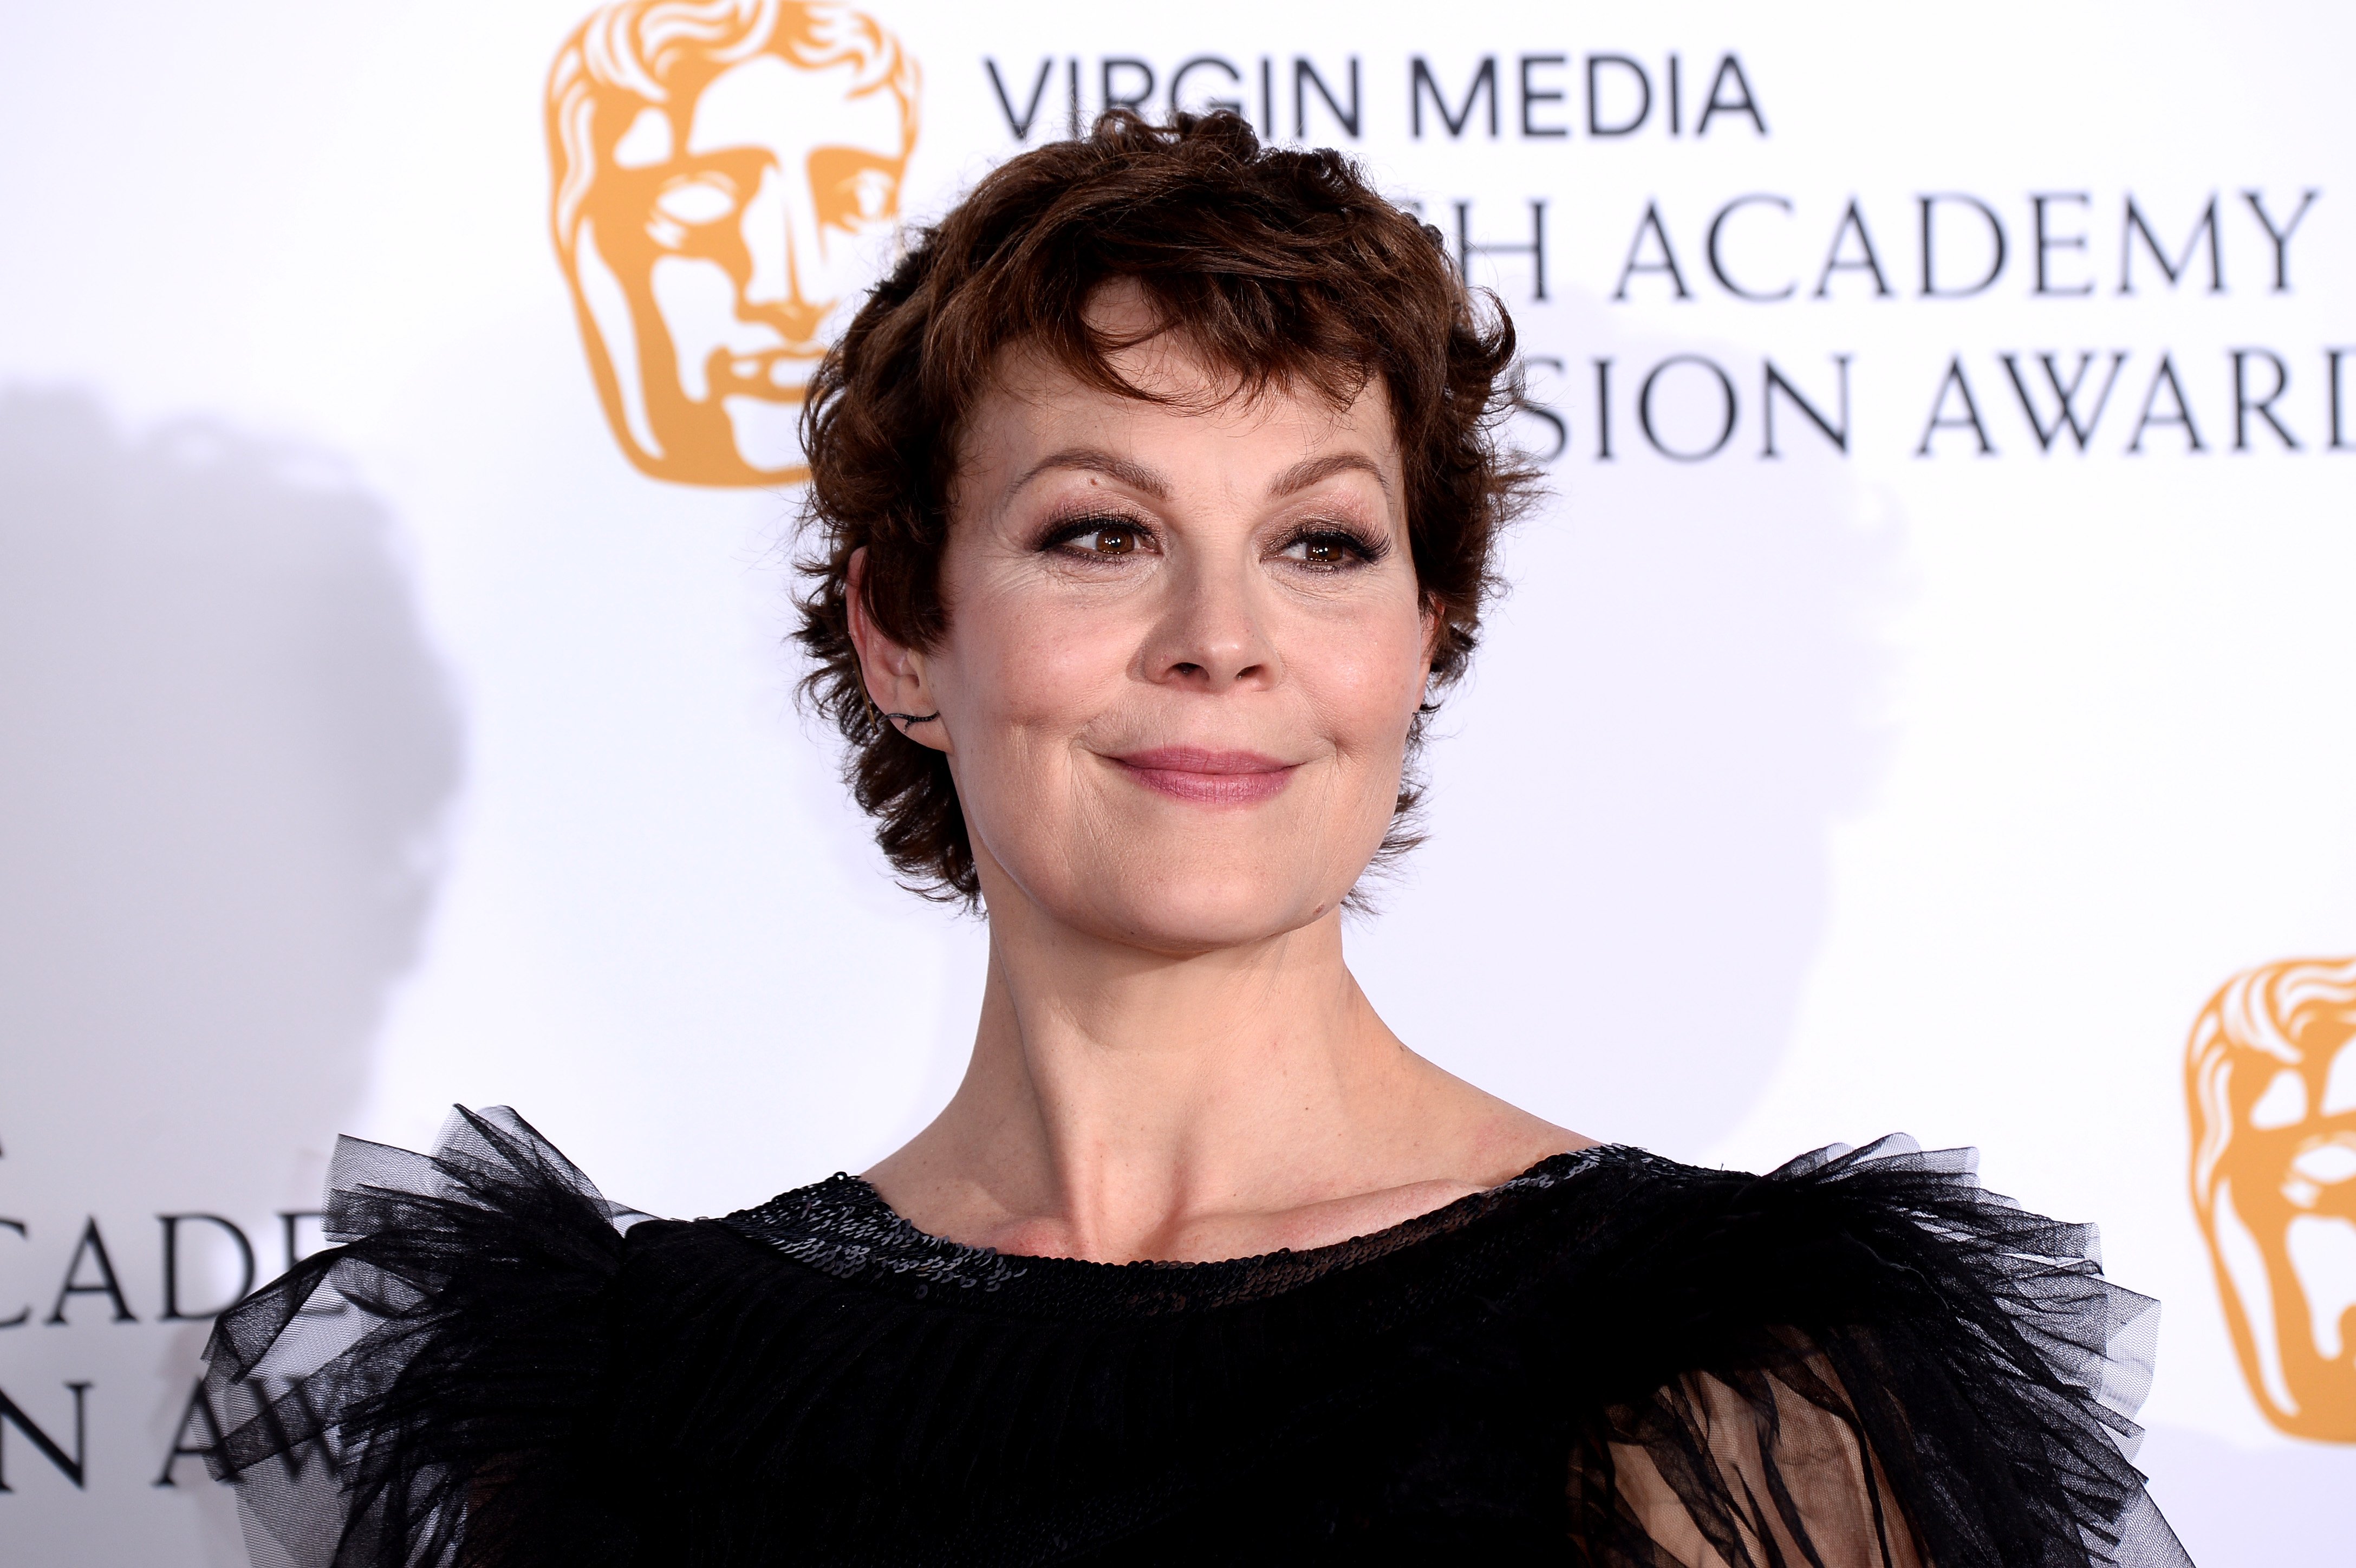 Helen McCrory at the Virgin TV BAFTA Television Awards at The Royal Festival Hall on May 12, 2019 in London, England | Photo: Getty Images